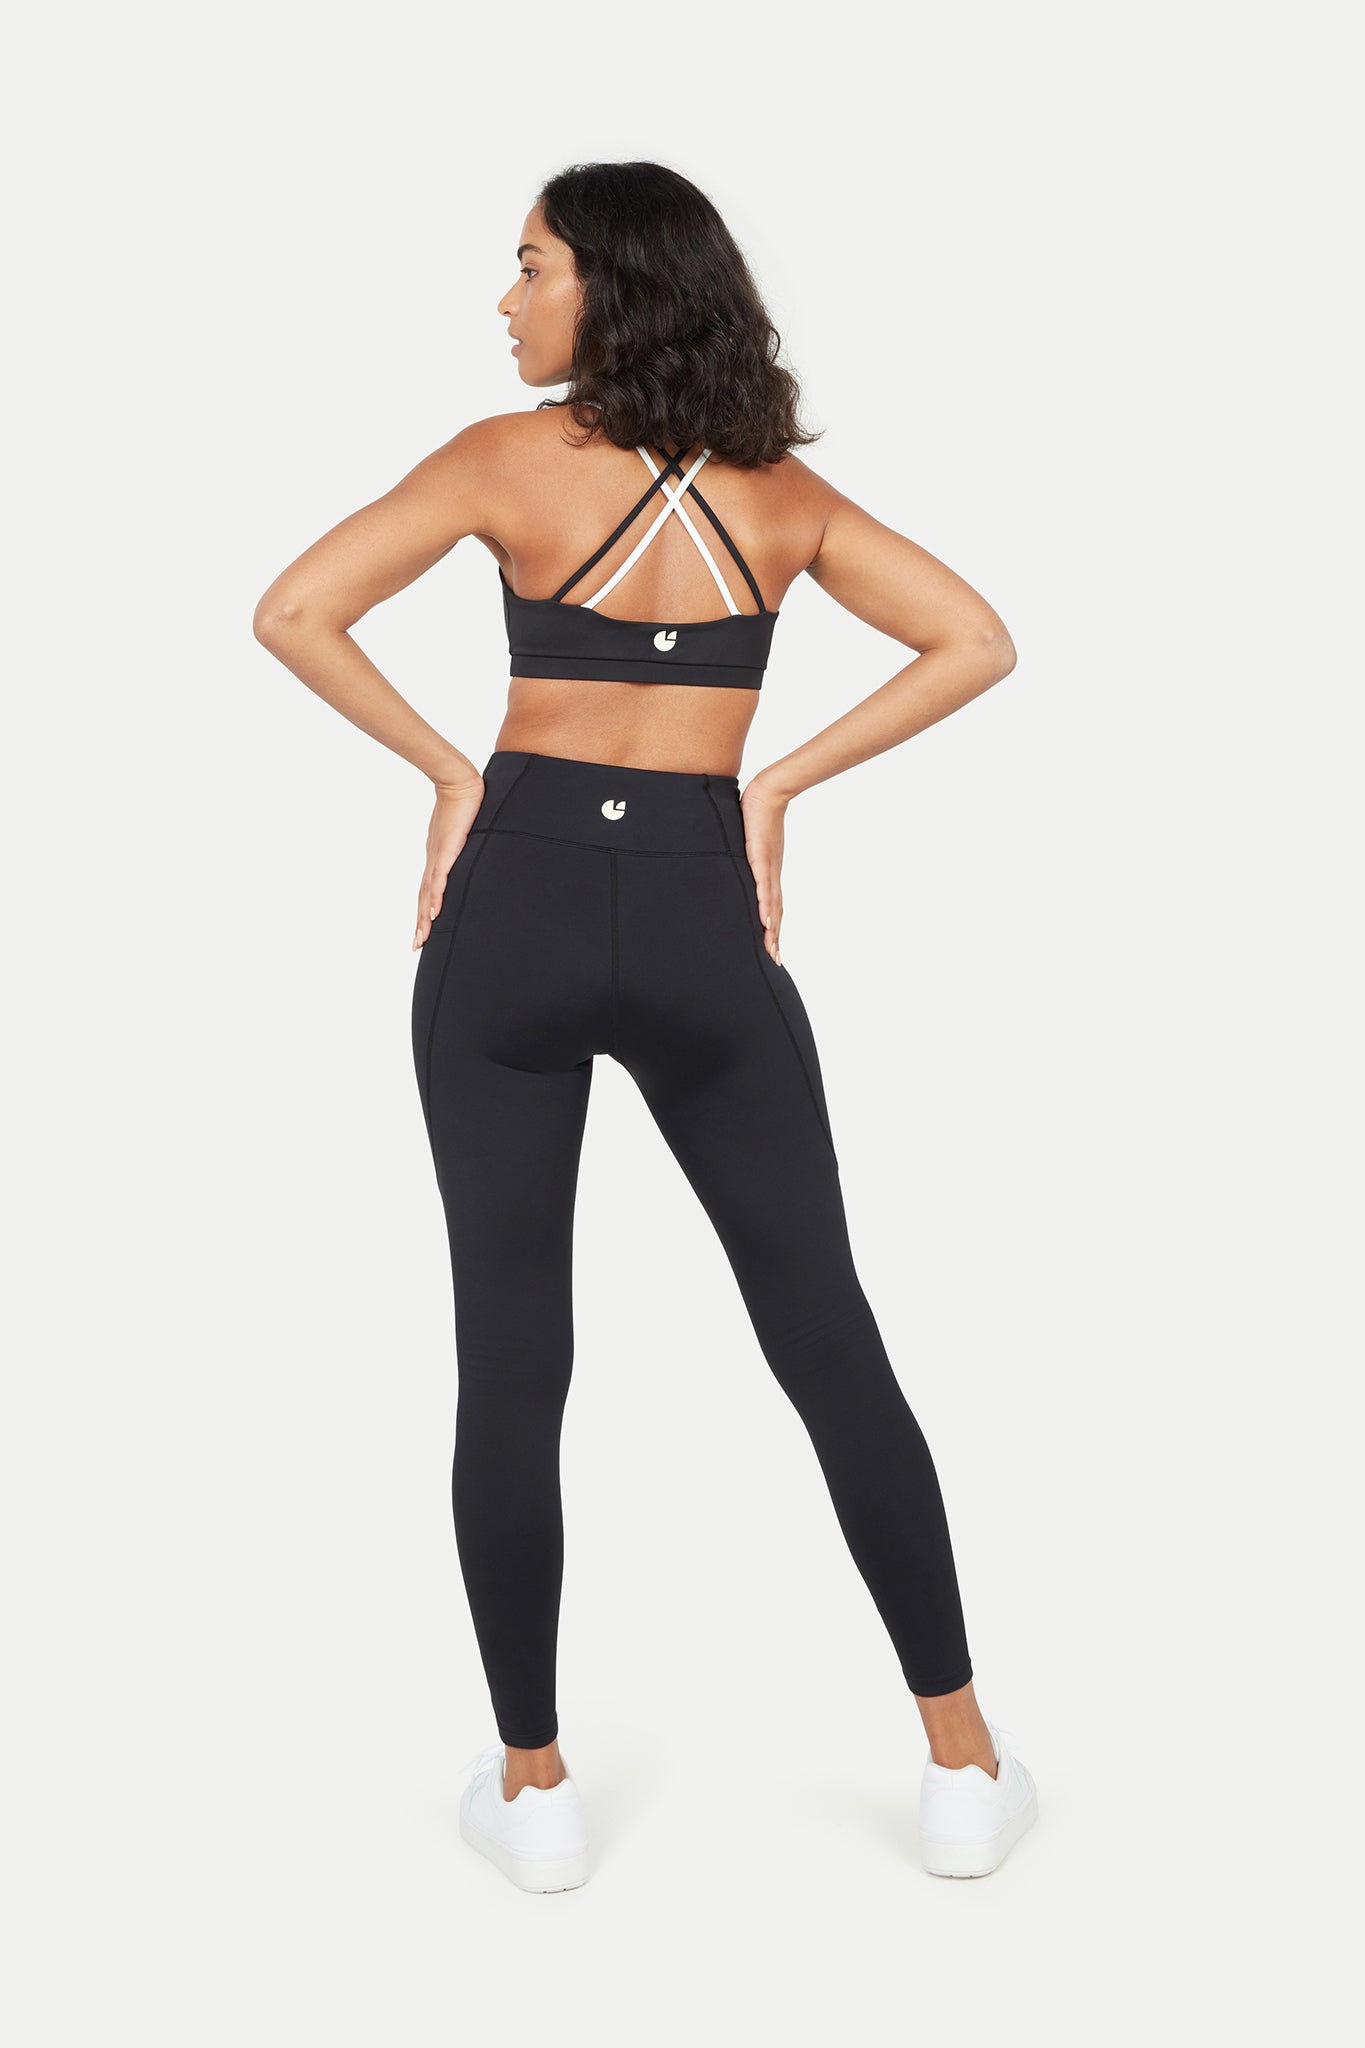 Buy Women's Leggings with Pockets - Non See Through Yoga Pants Buttery Soft  High Waist Tummy Control Workout Athletic Tights, Black, Small-Medium at  Amazon.in